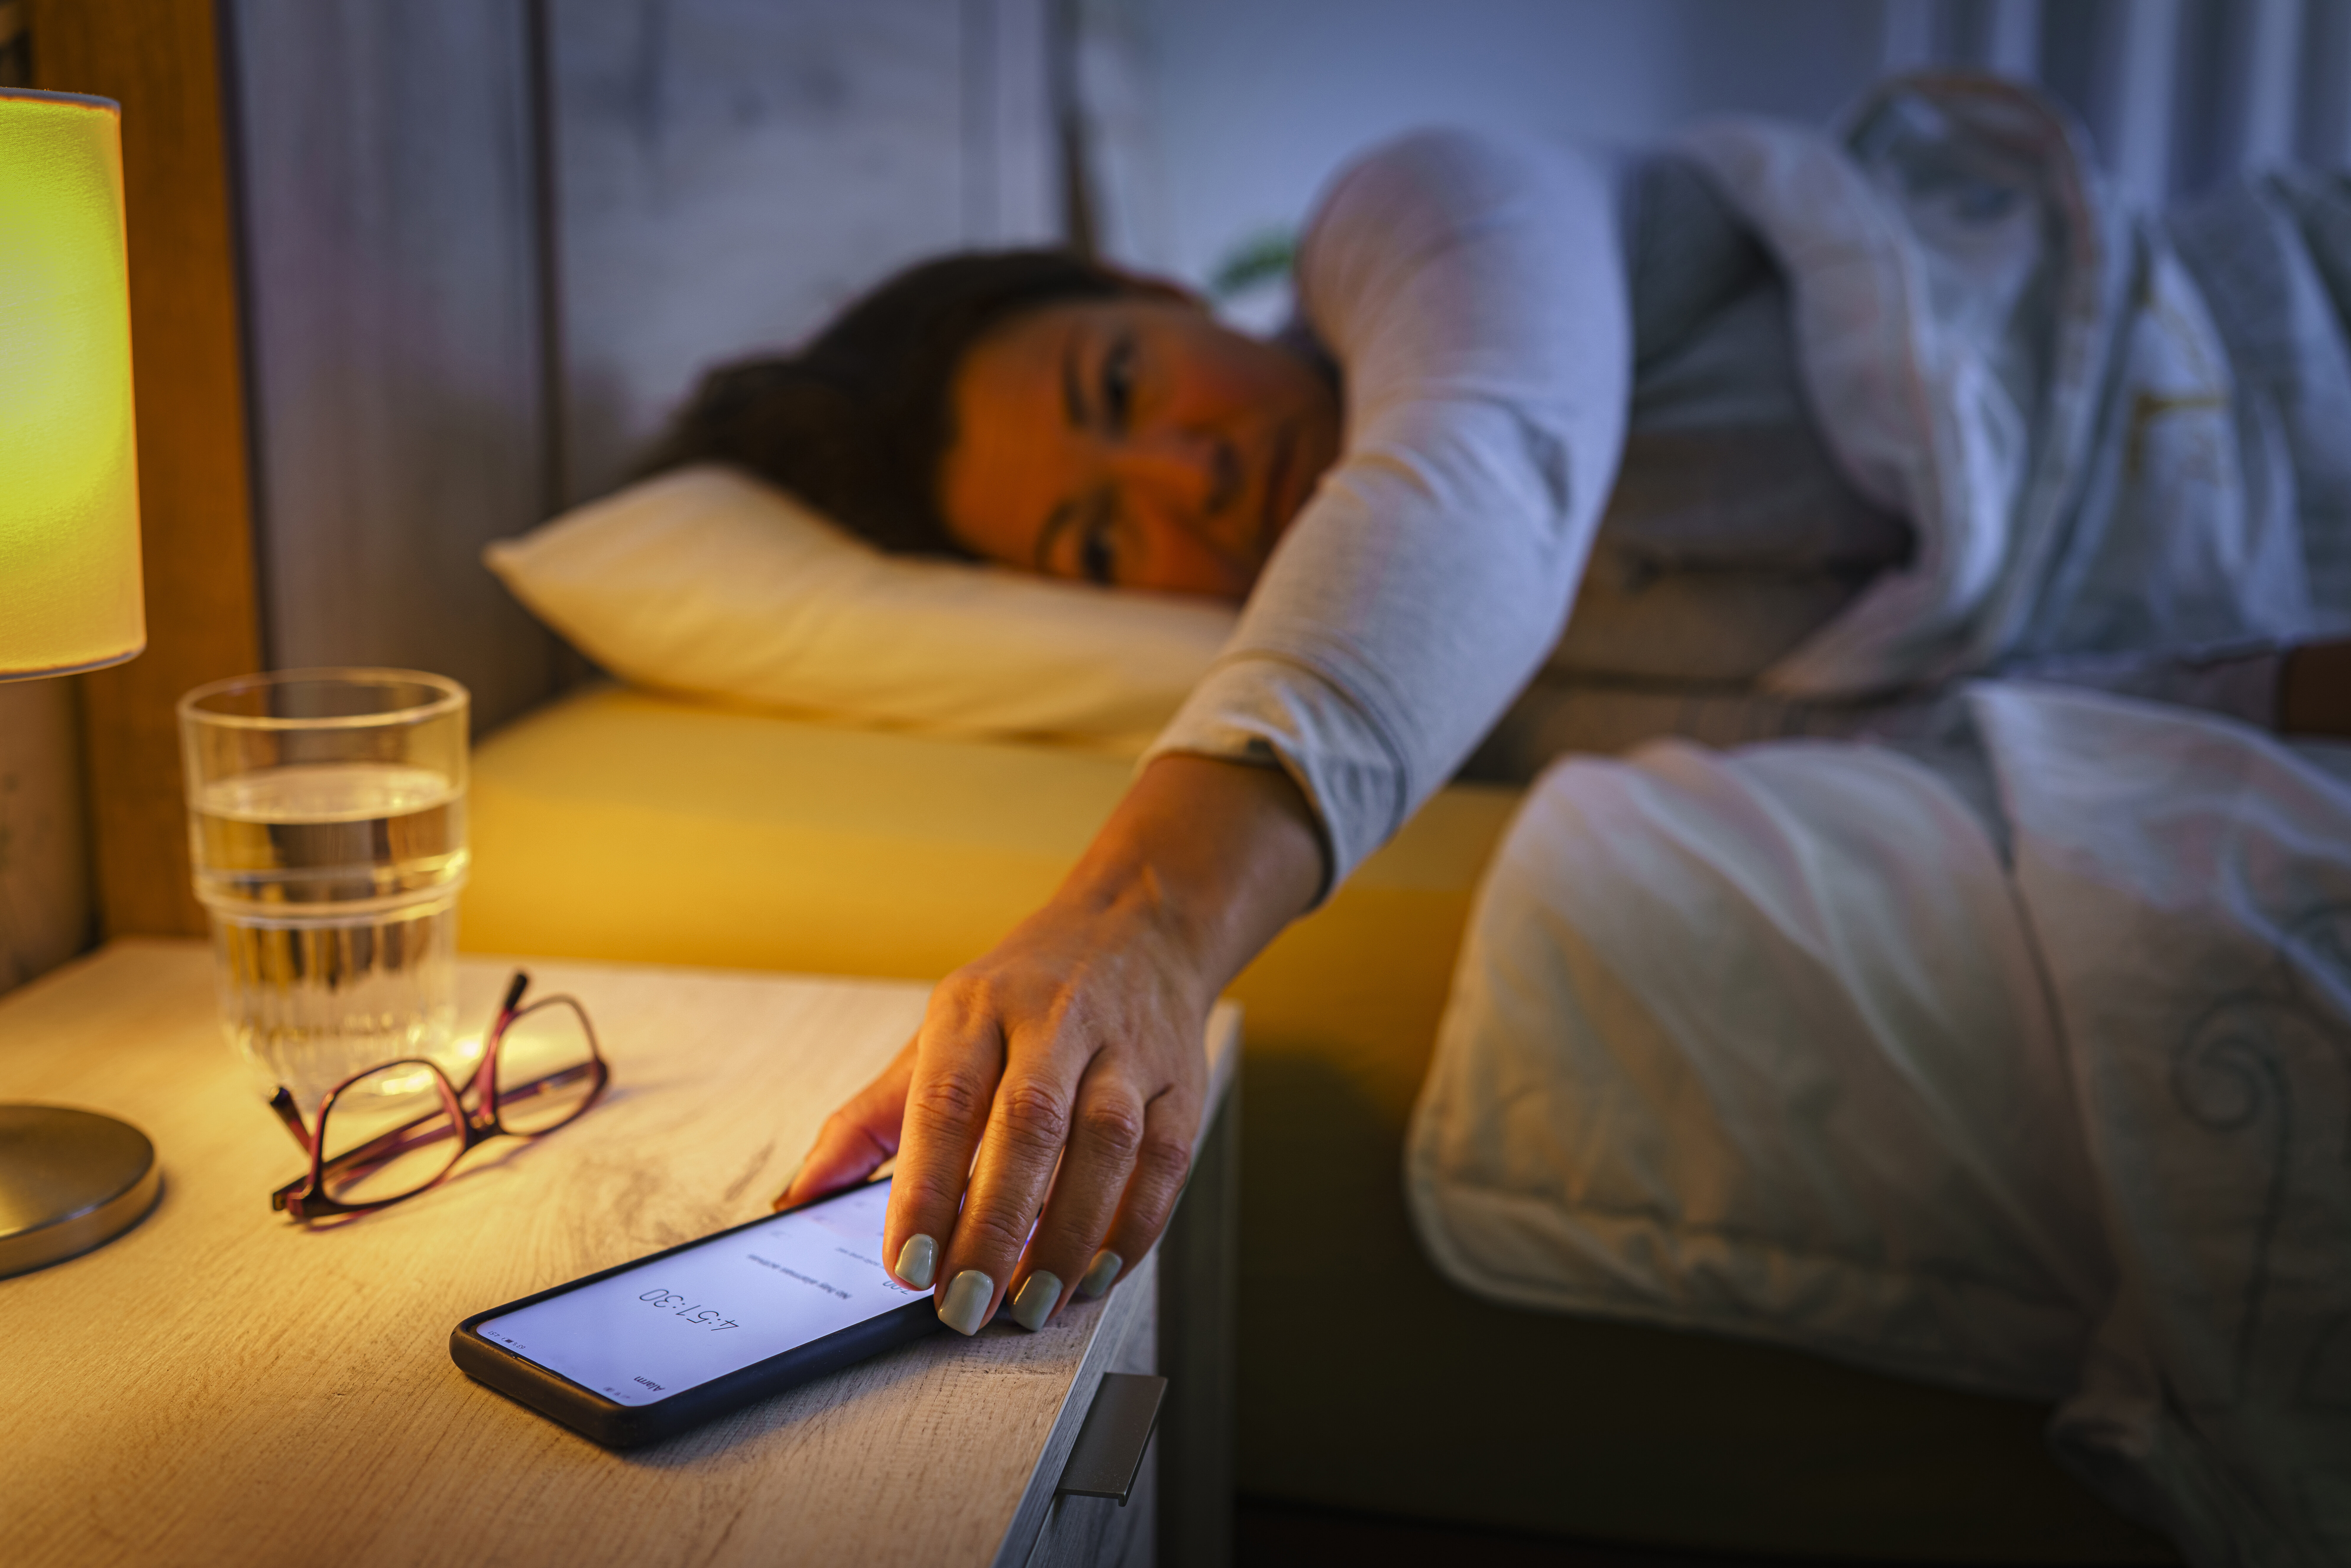 The Best Alarm Sounds To Wake Up To According To Experts | HuffPost Life